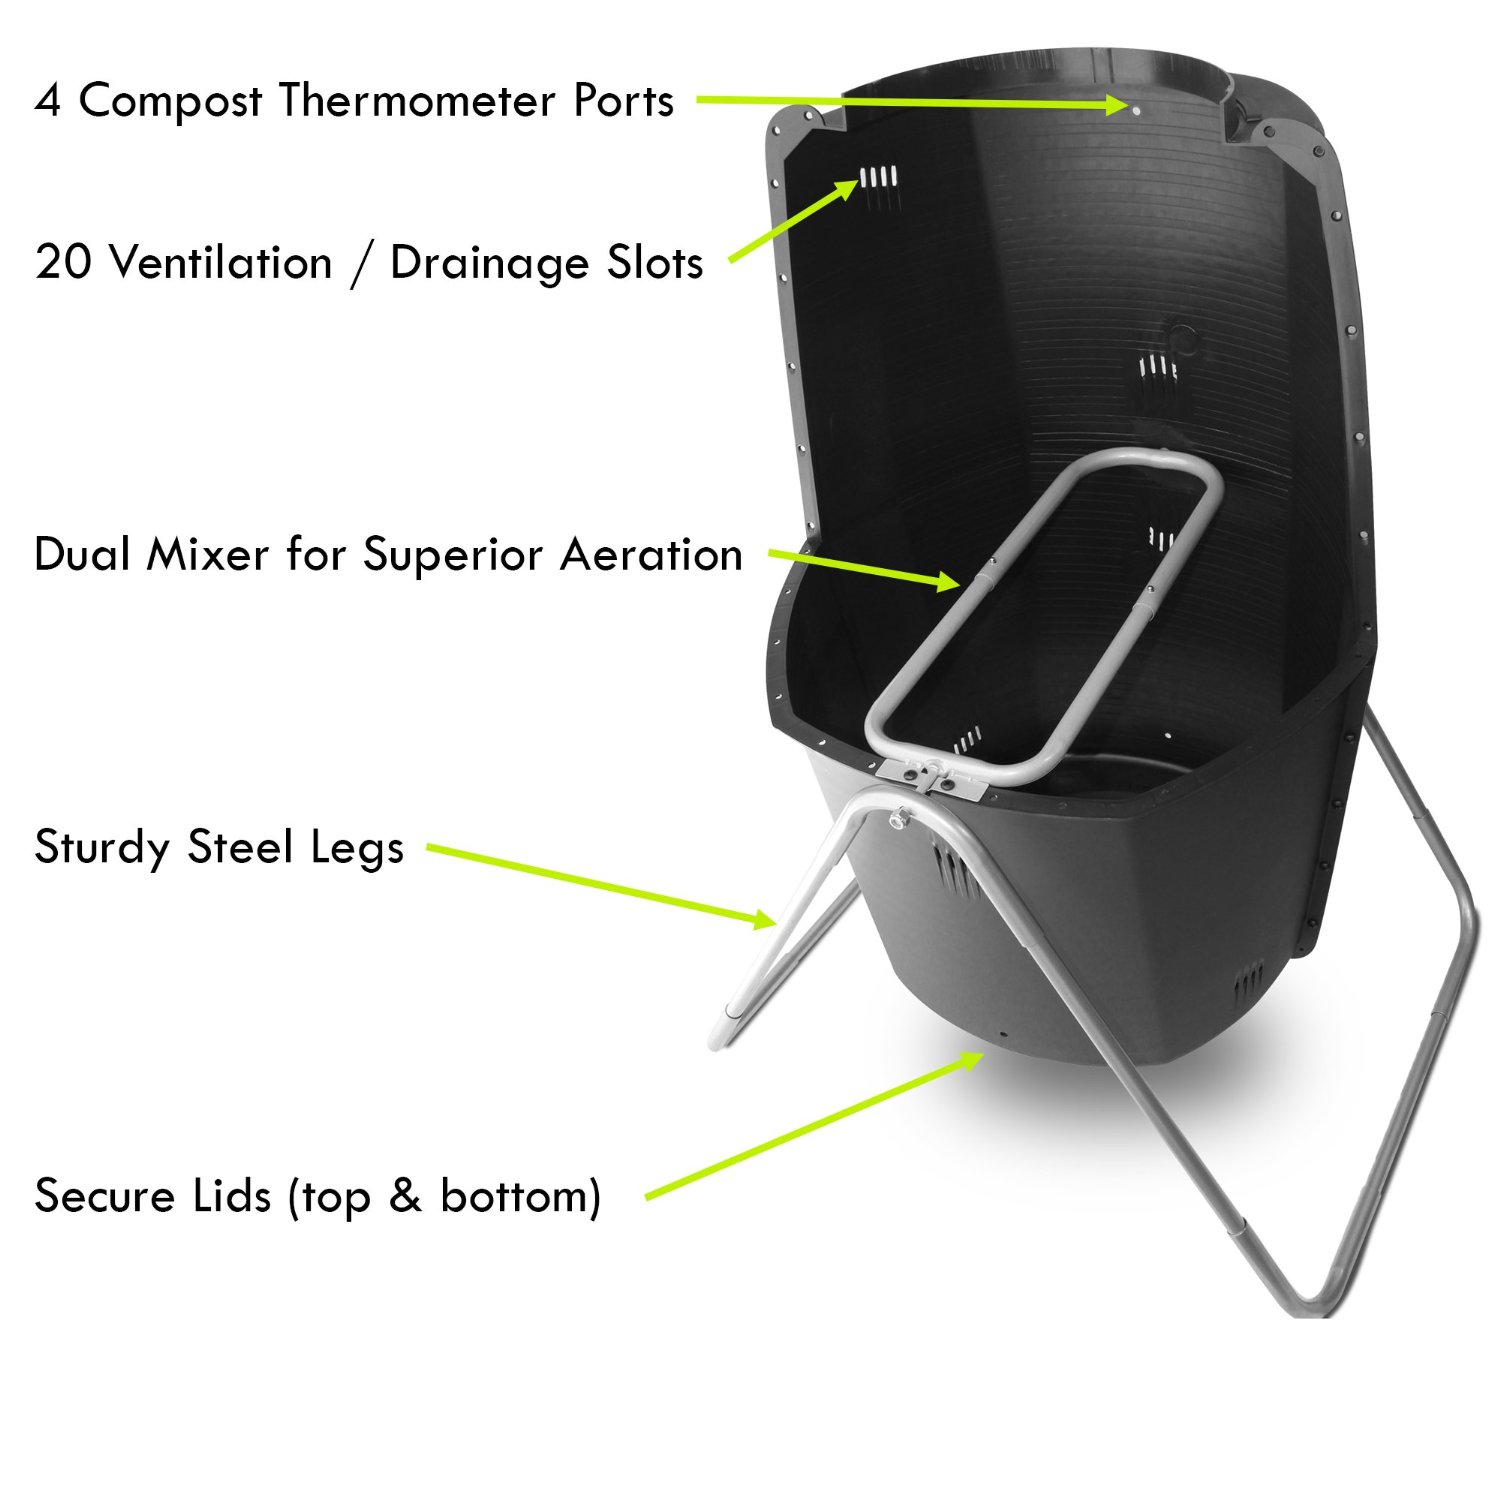 A breakdown of the specifications and unique features of the Spin Bin composting tumbler